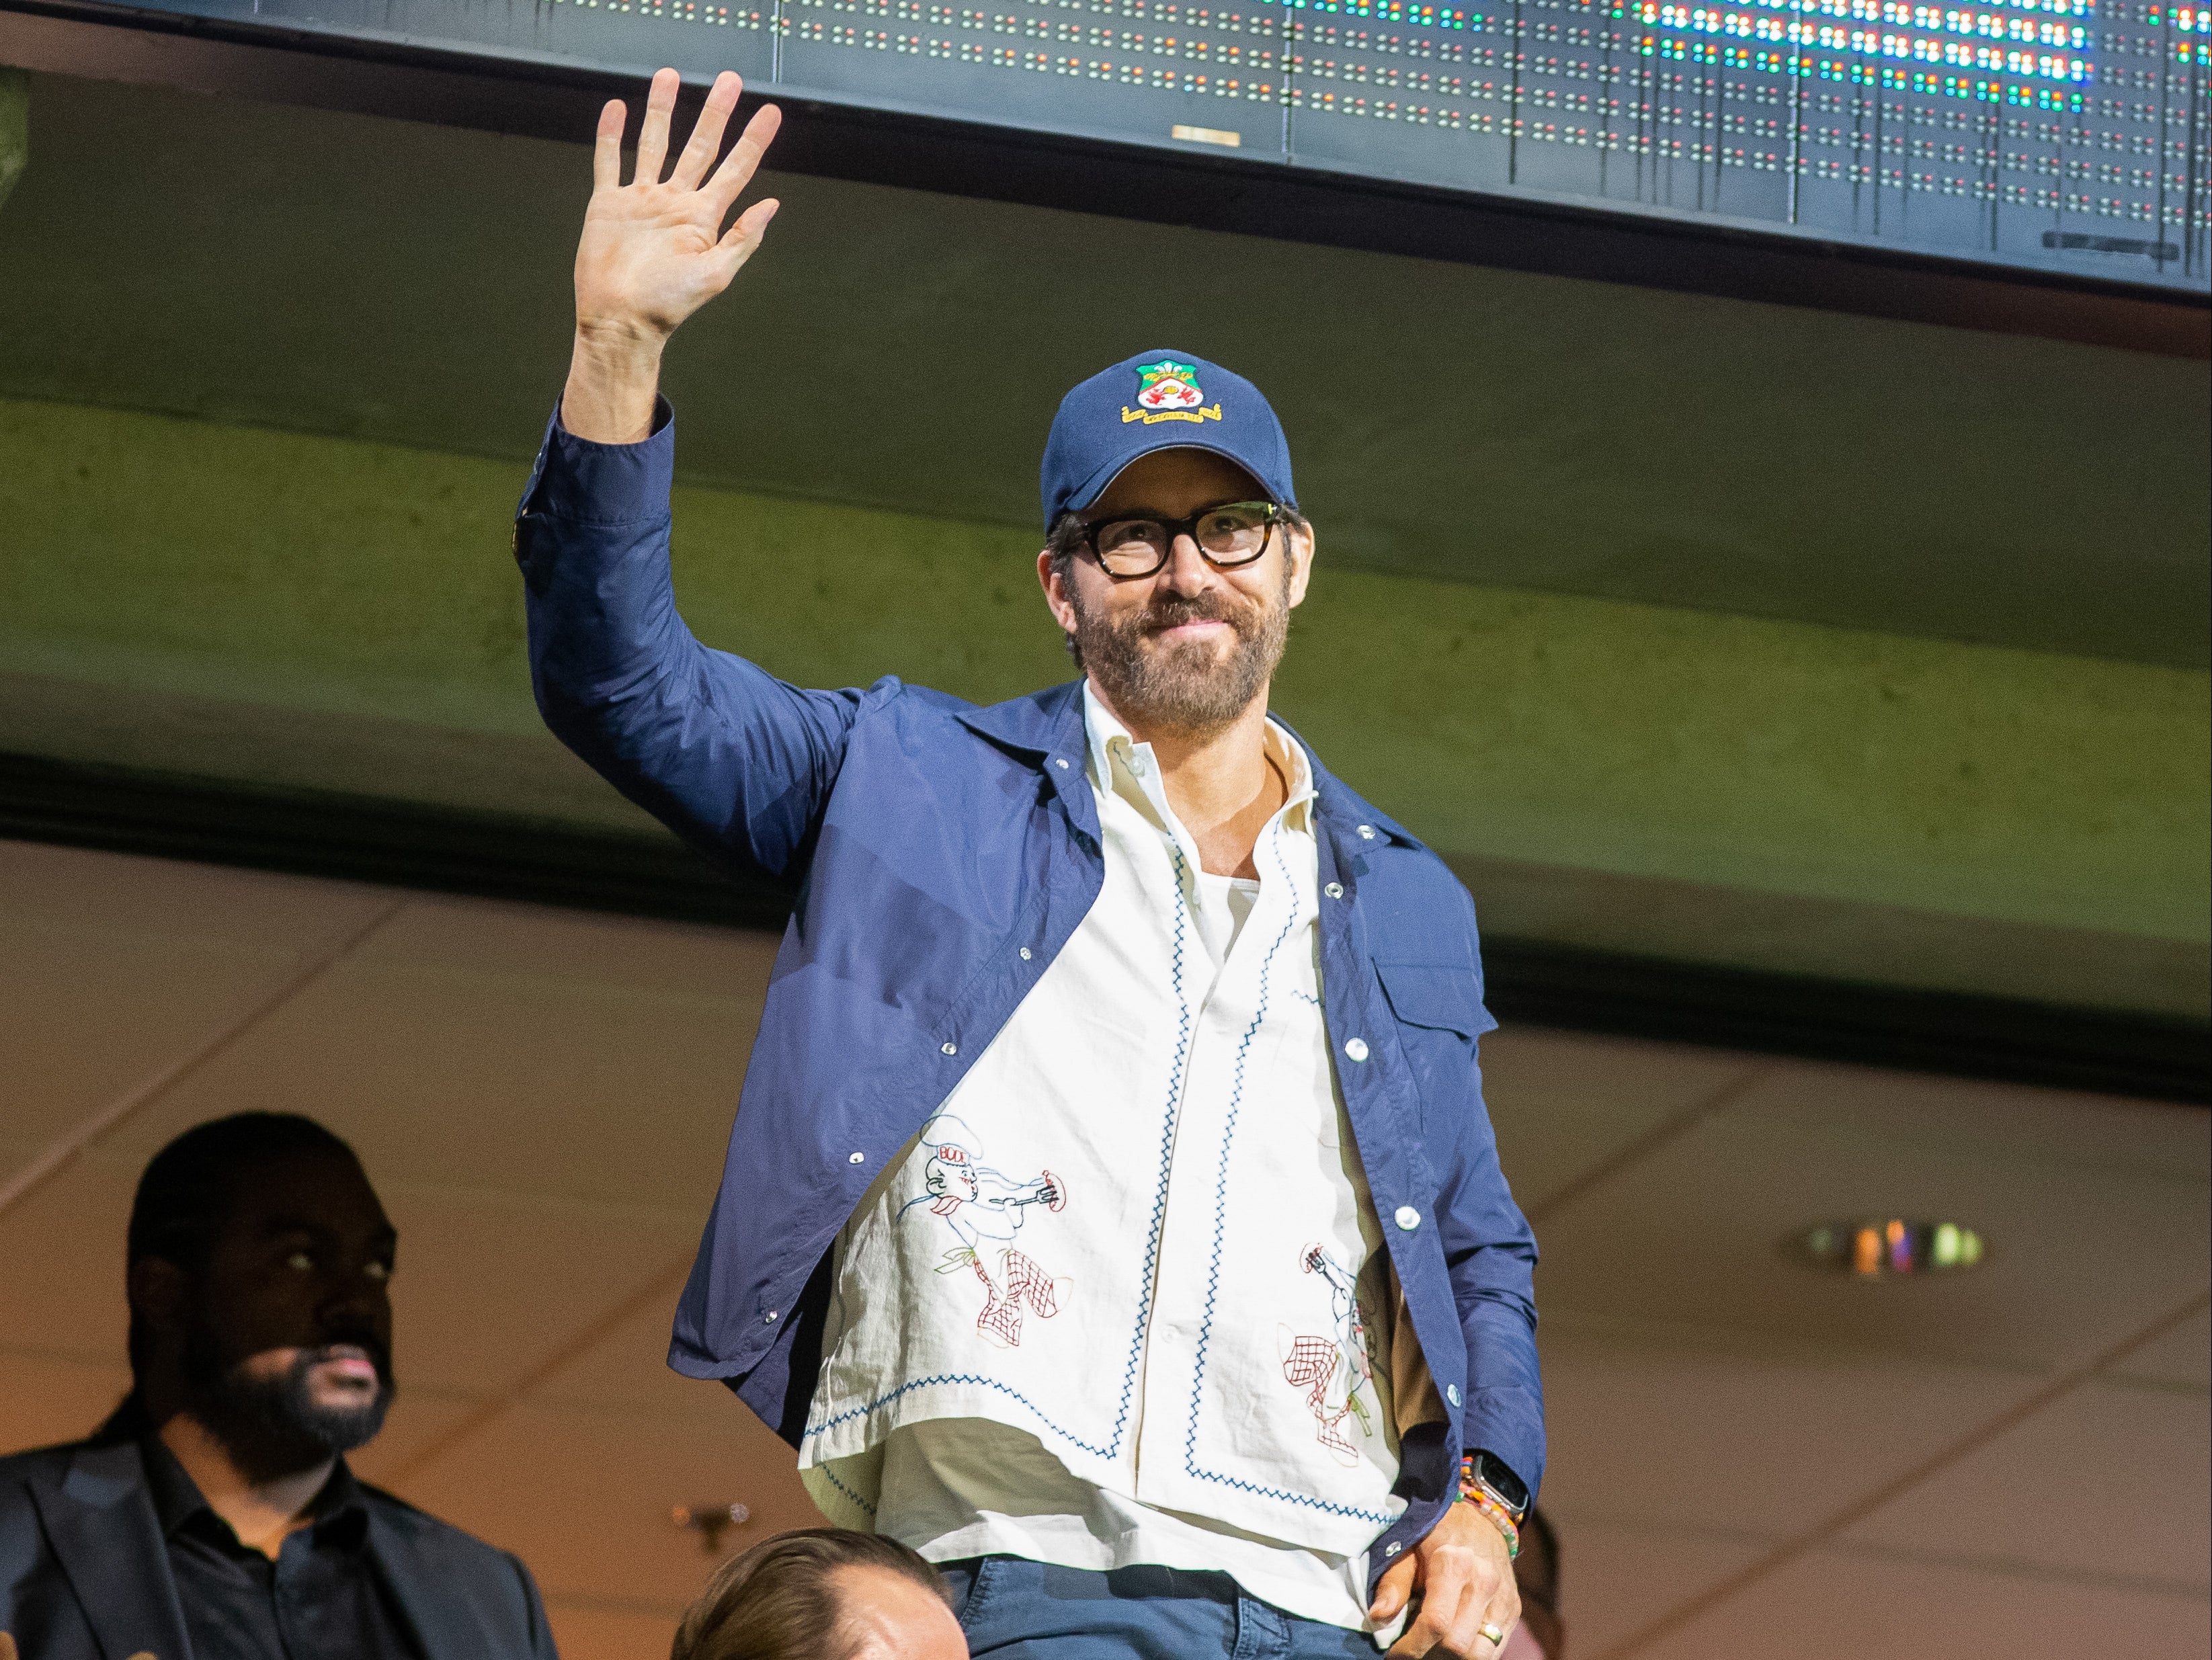 Ryan Reynolds is the co-owner of National League football side Wrexham